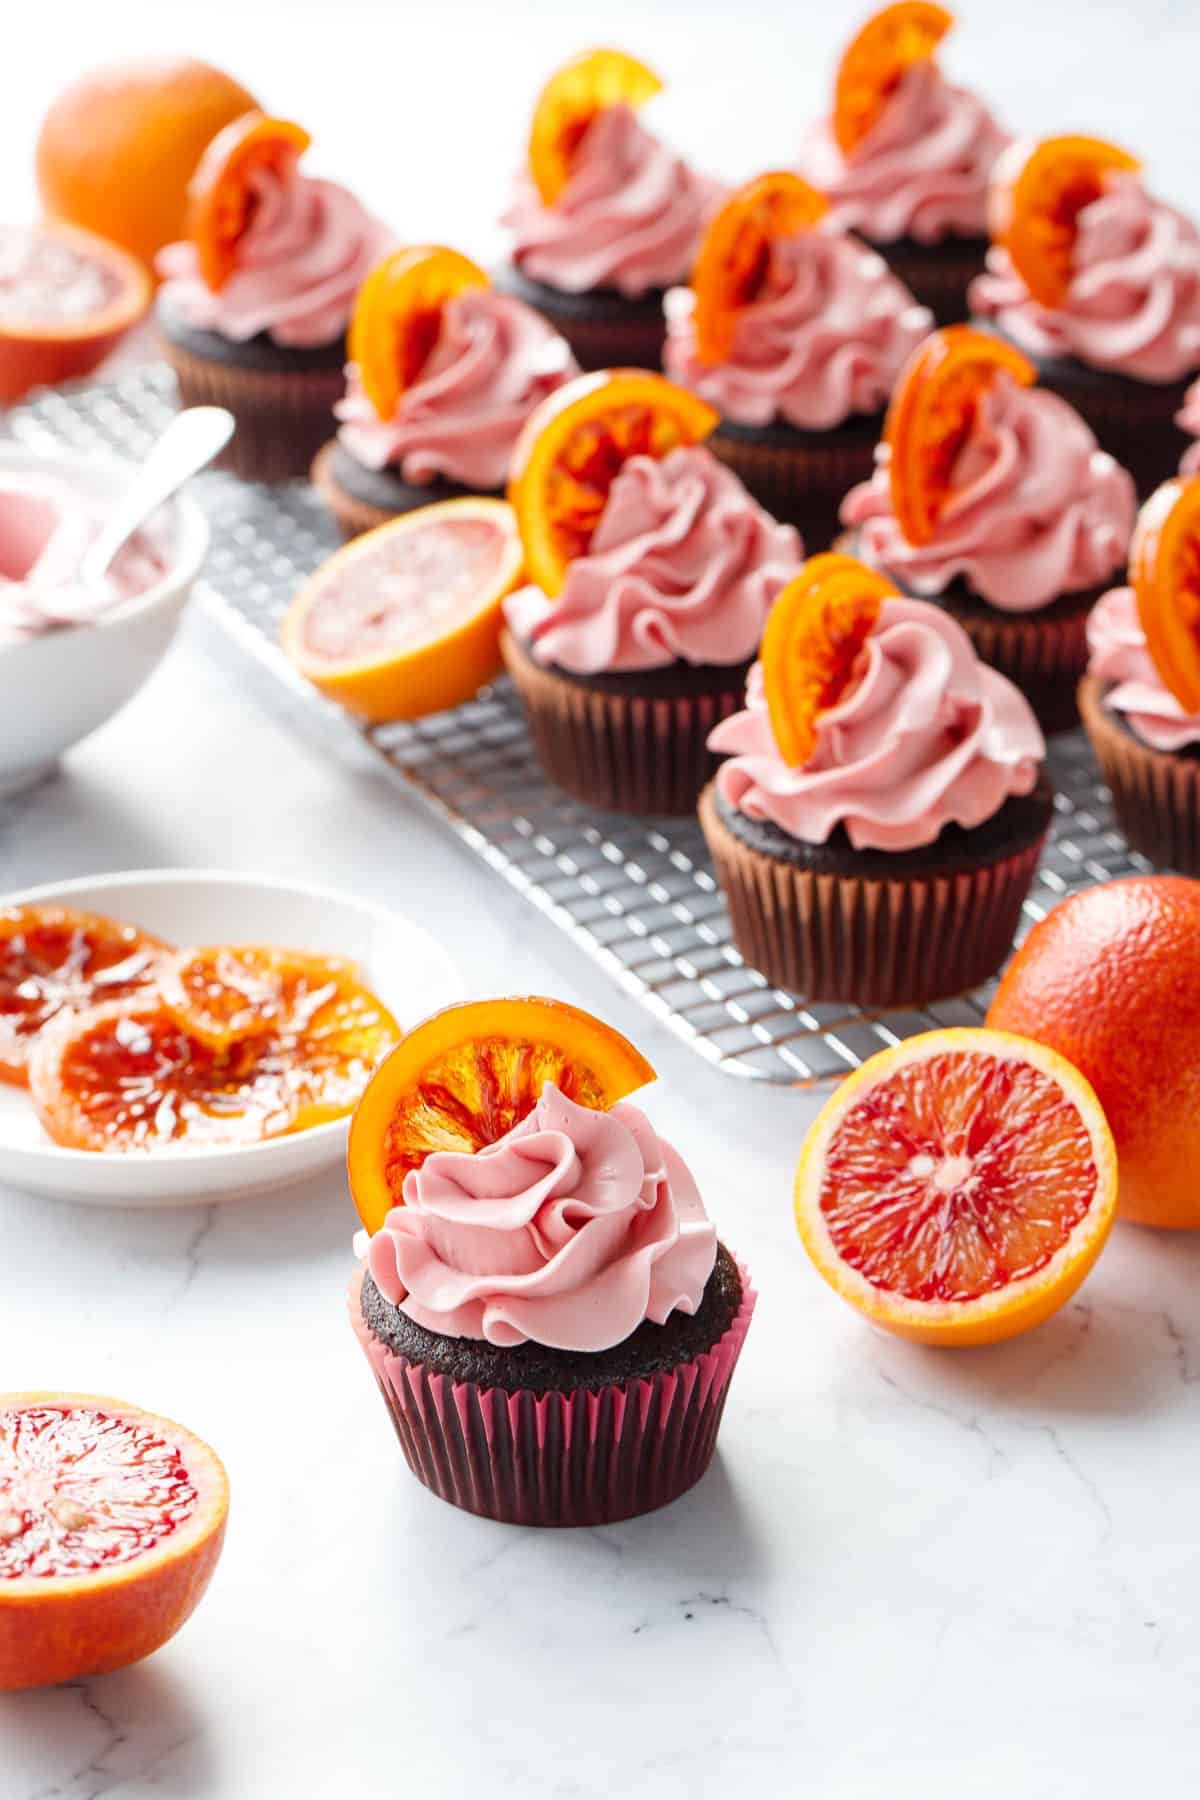 Brightly colored and backlit Chocolate Olive Oil & Blood Orange Cupcakes on a marble background, with fresh blood oranges (whole and halved), plus a plate of candied oranges and bowl of light pink frosting in the background.